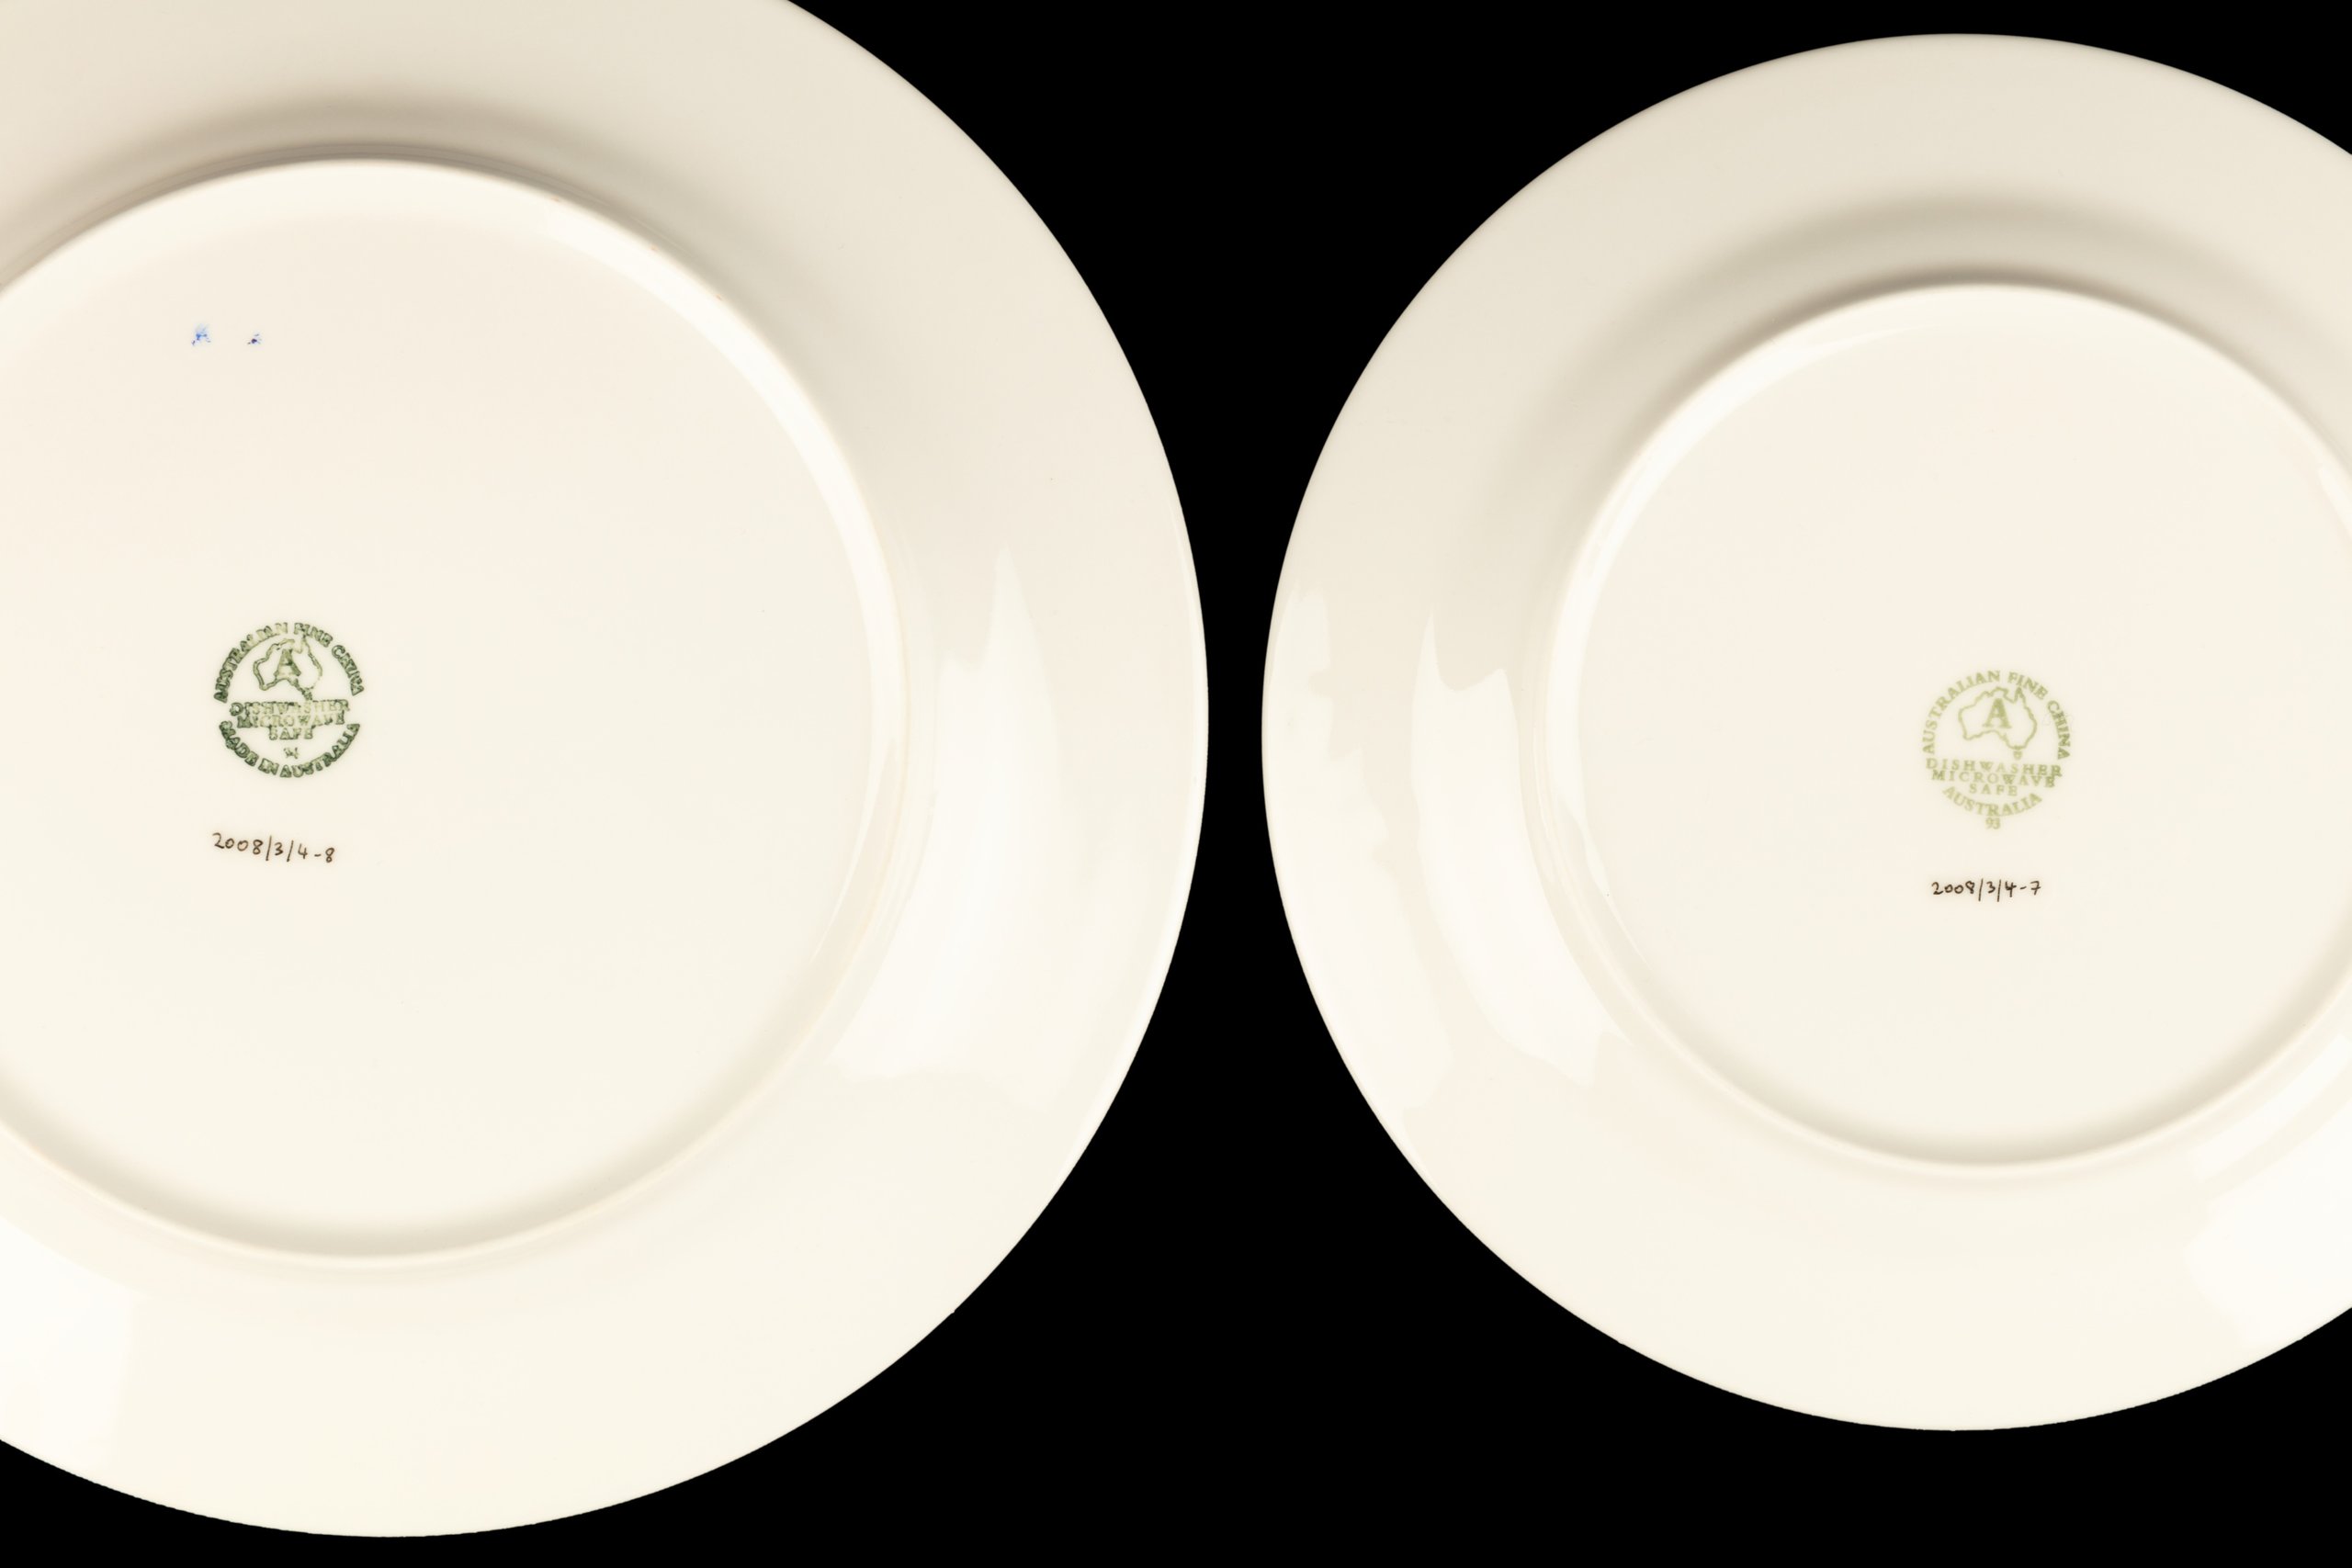 Tableware and napkin designed by Ken Done